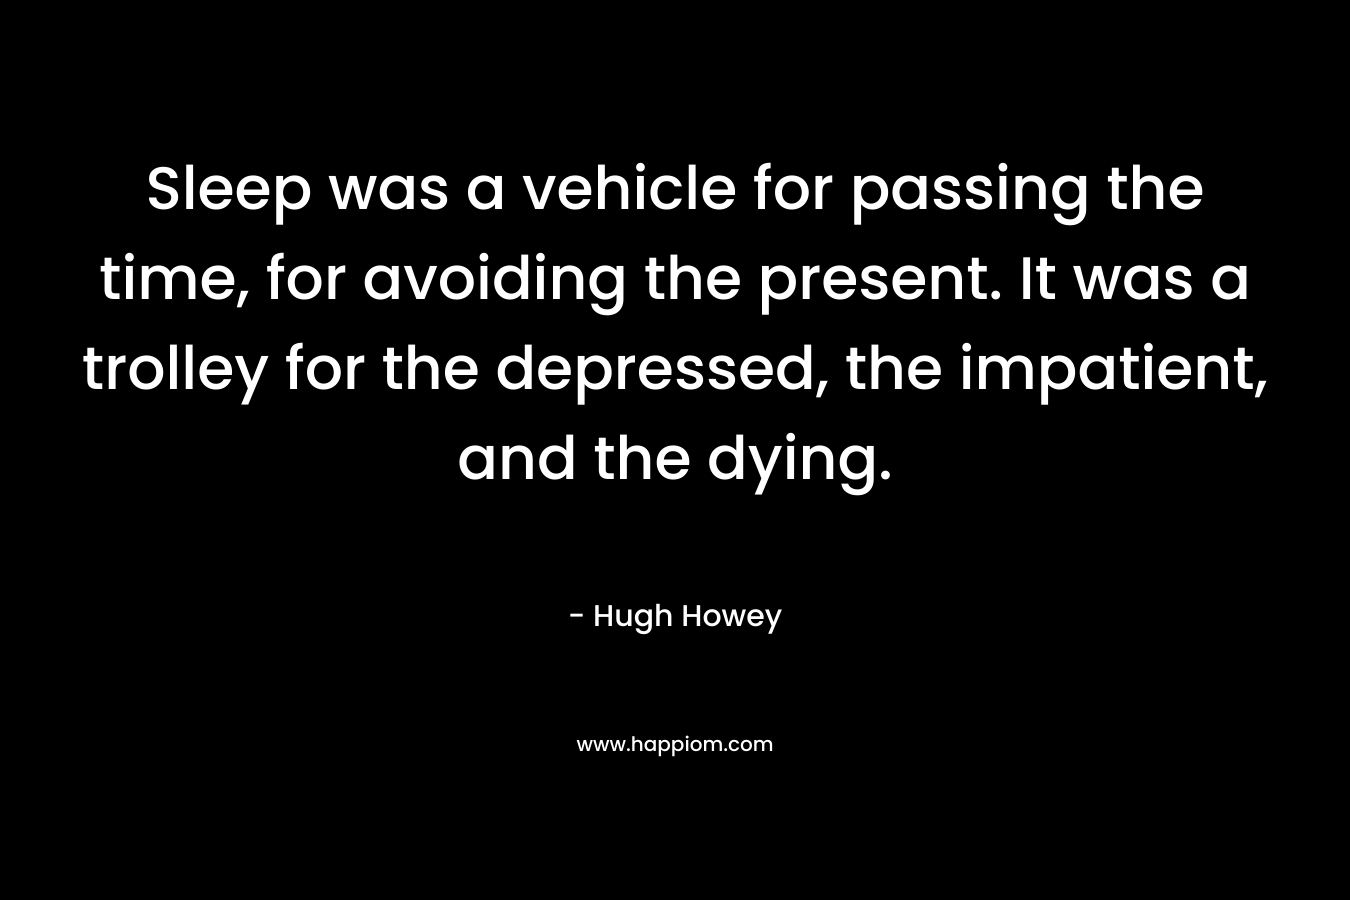 Sleep was a vehicle for passing the time, for avoiding the present. It was a trolley for the depressed, the impatient, and the dying. – Hugh Howey